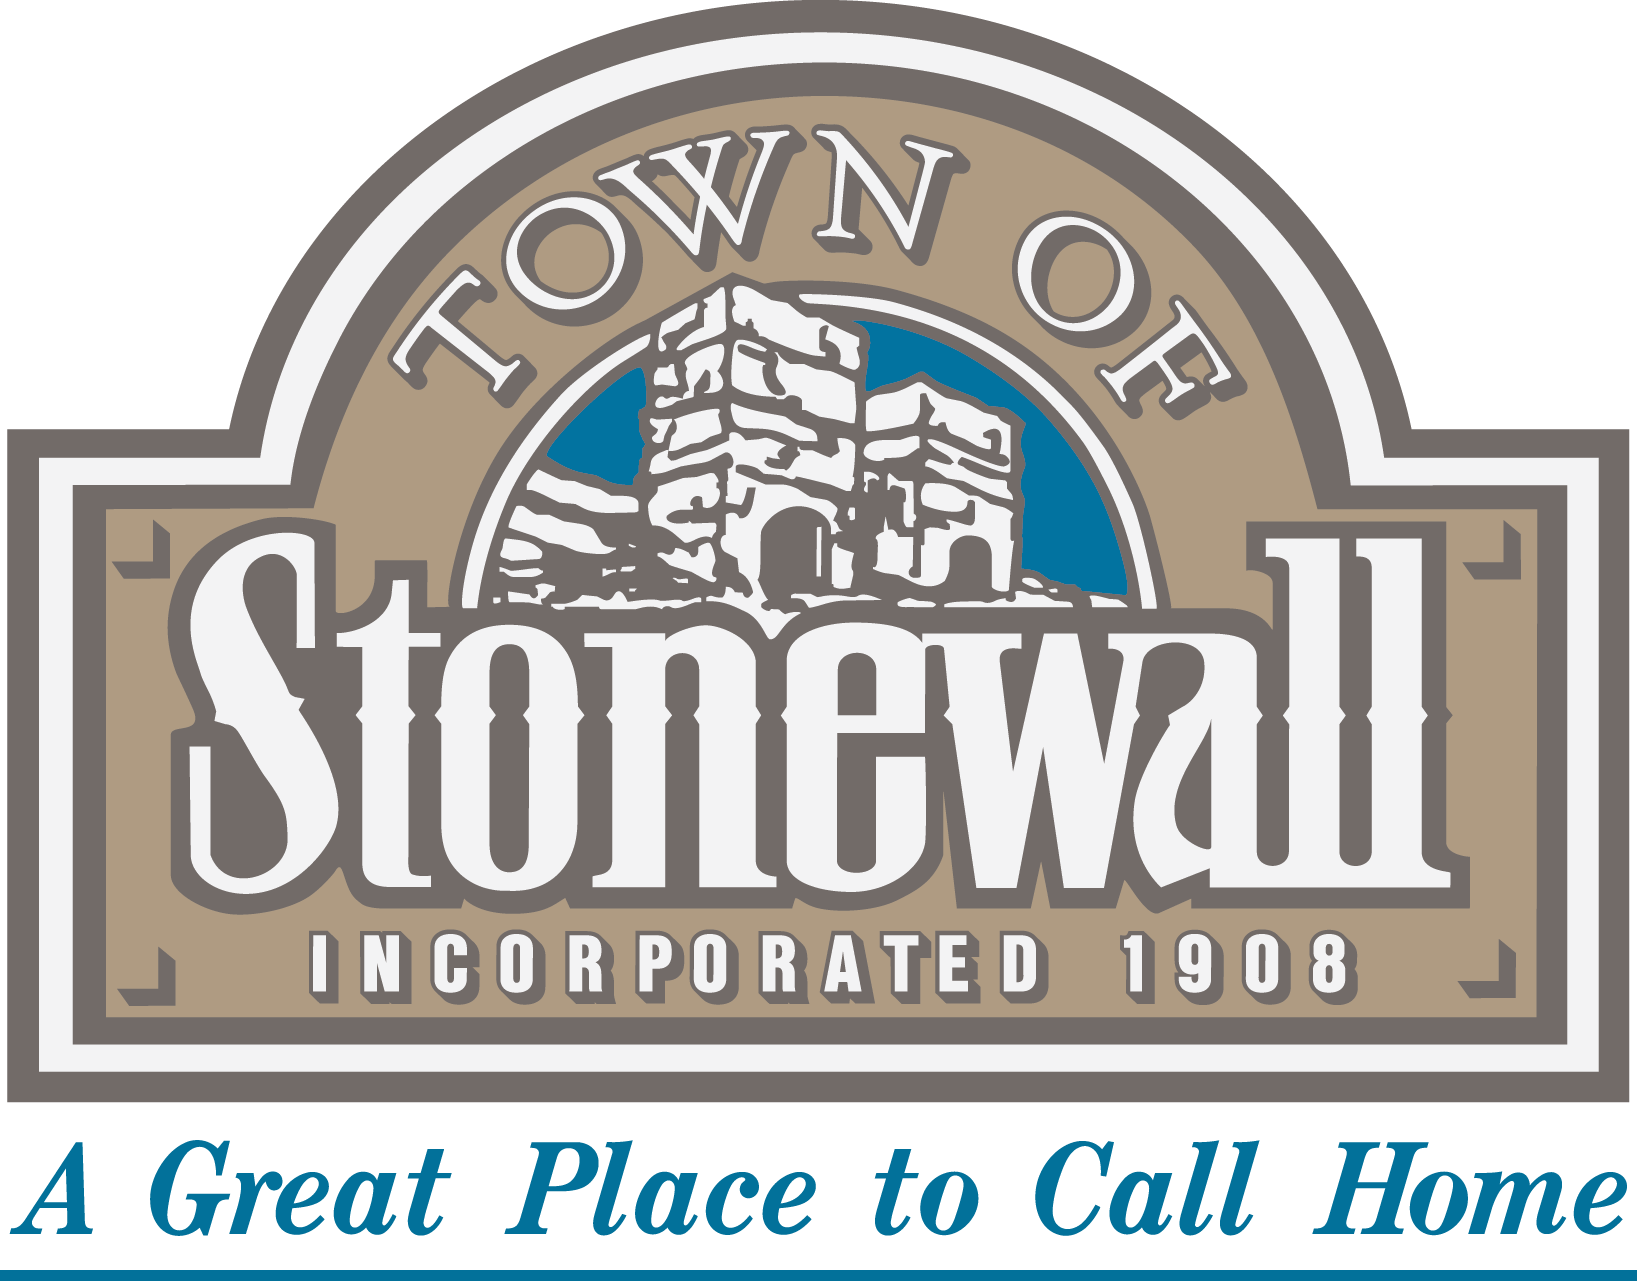 Town of Stonewall